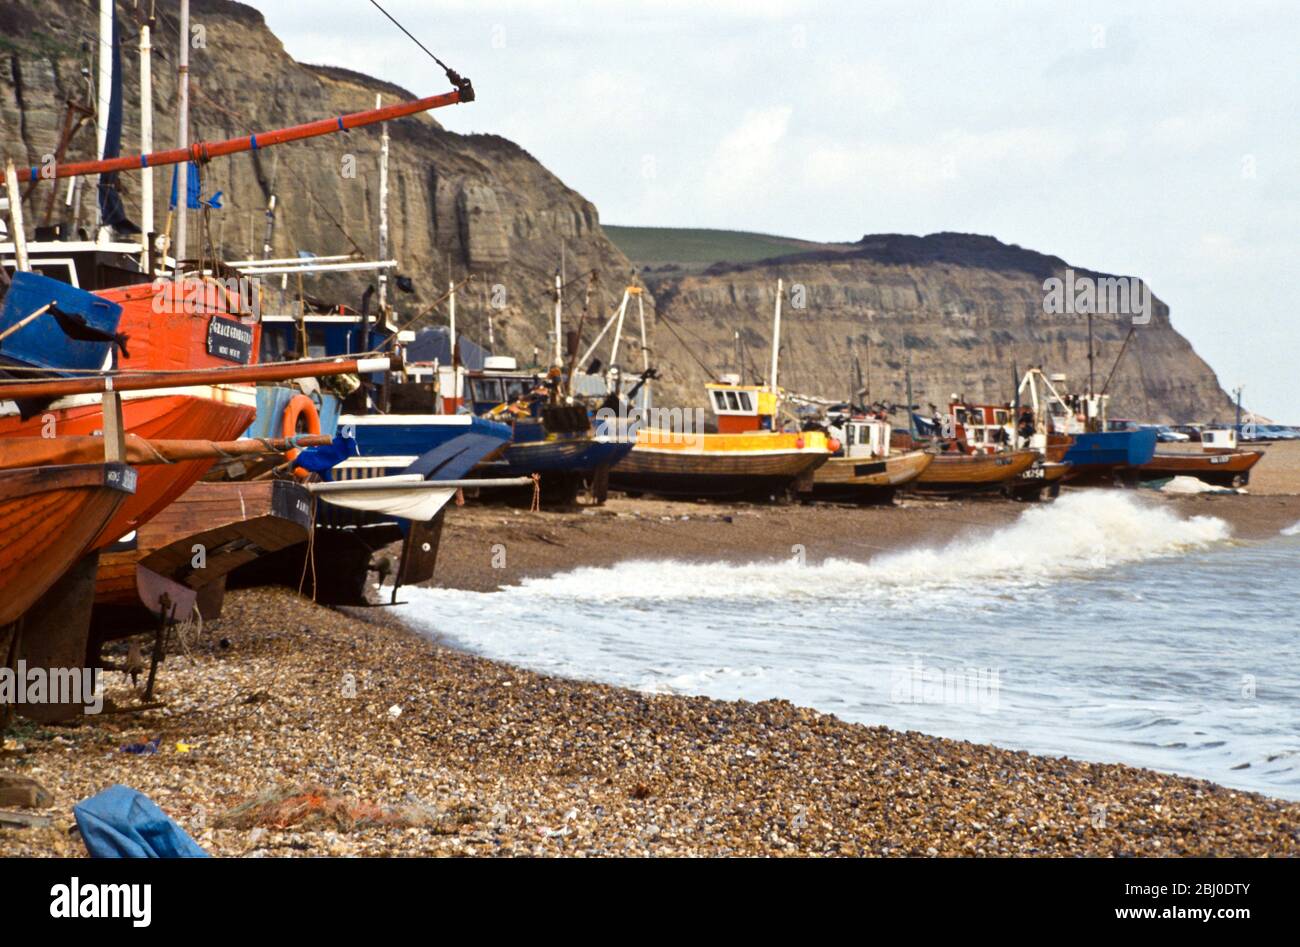 Fishing boats pulled up onto the shingle at Hastings, Sussex, UK - Stock Photo